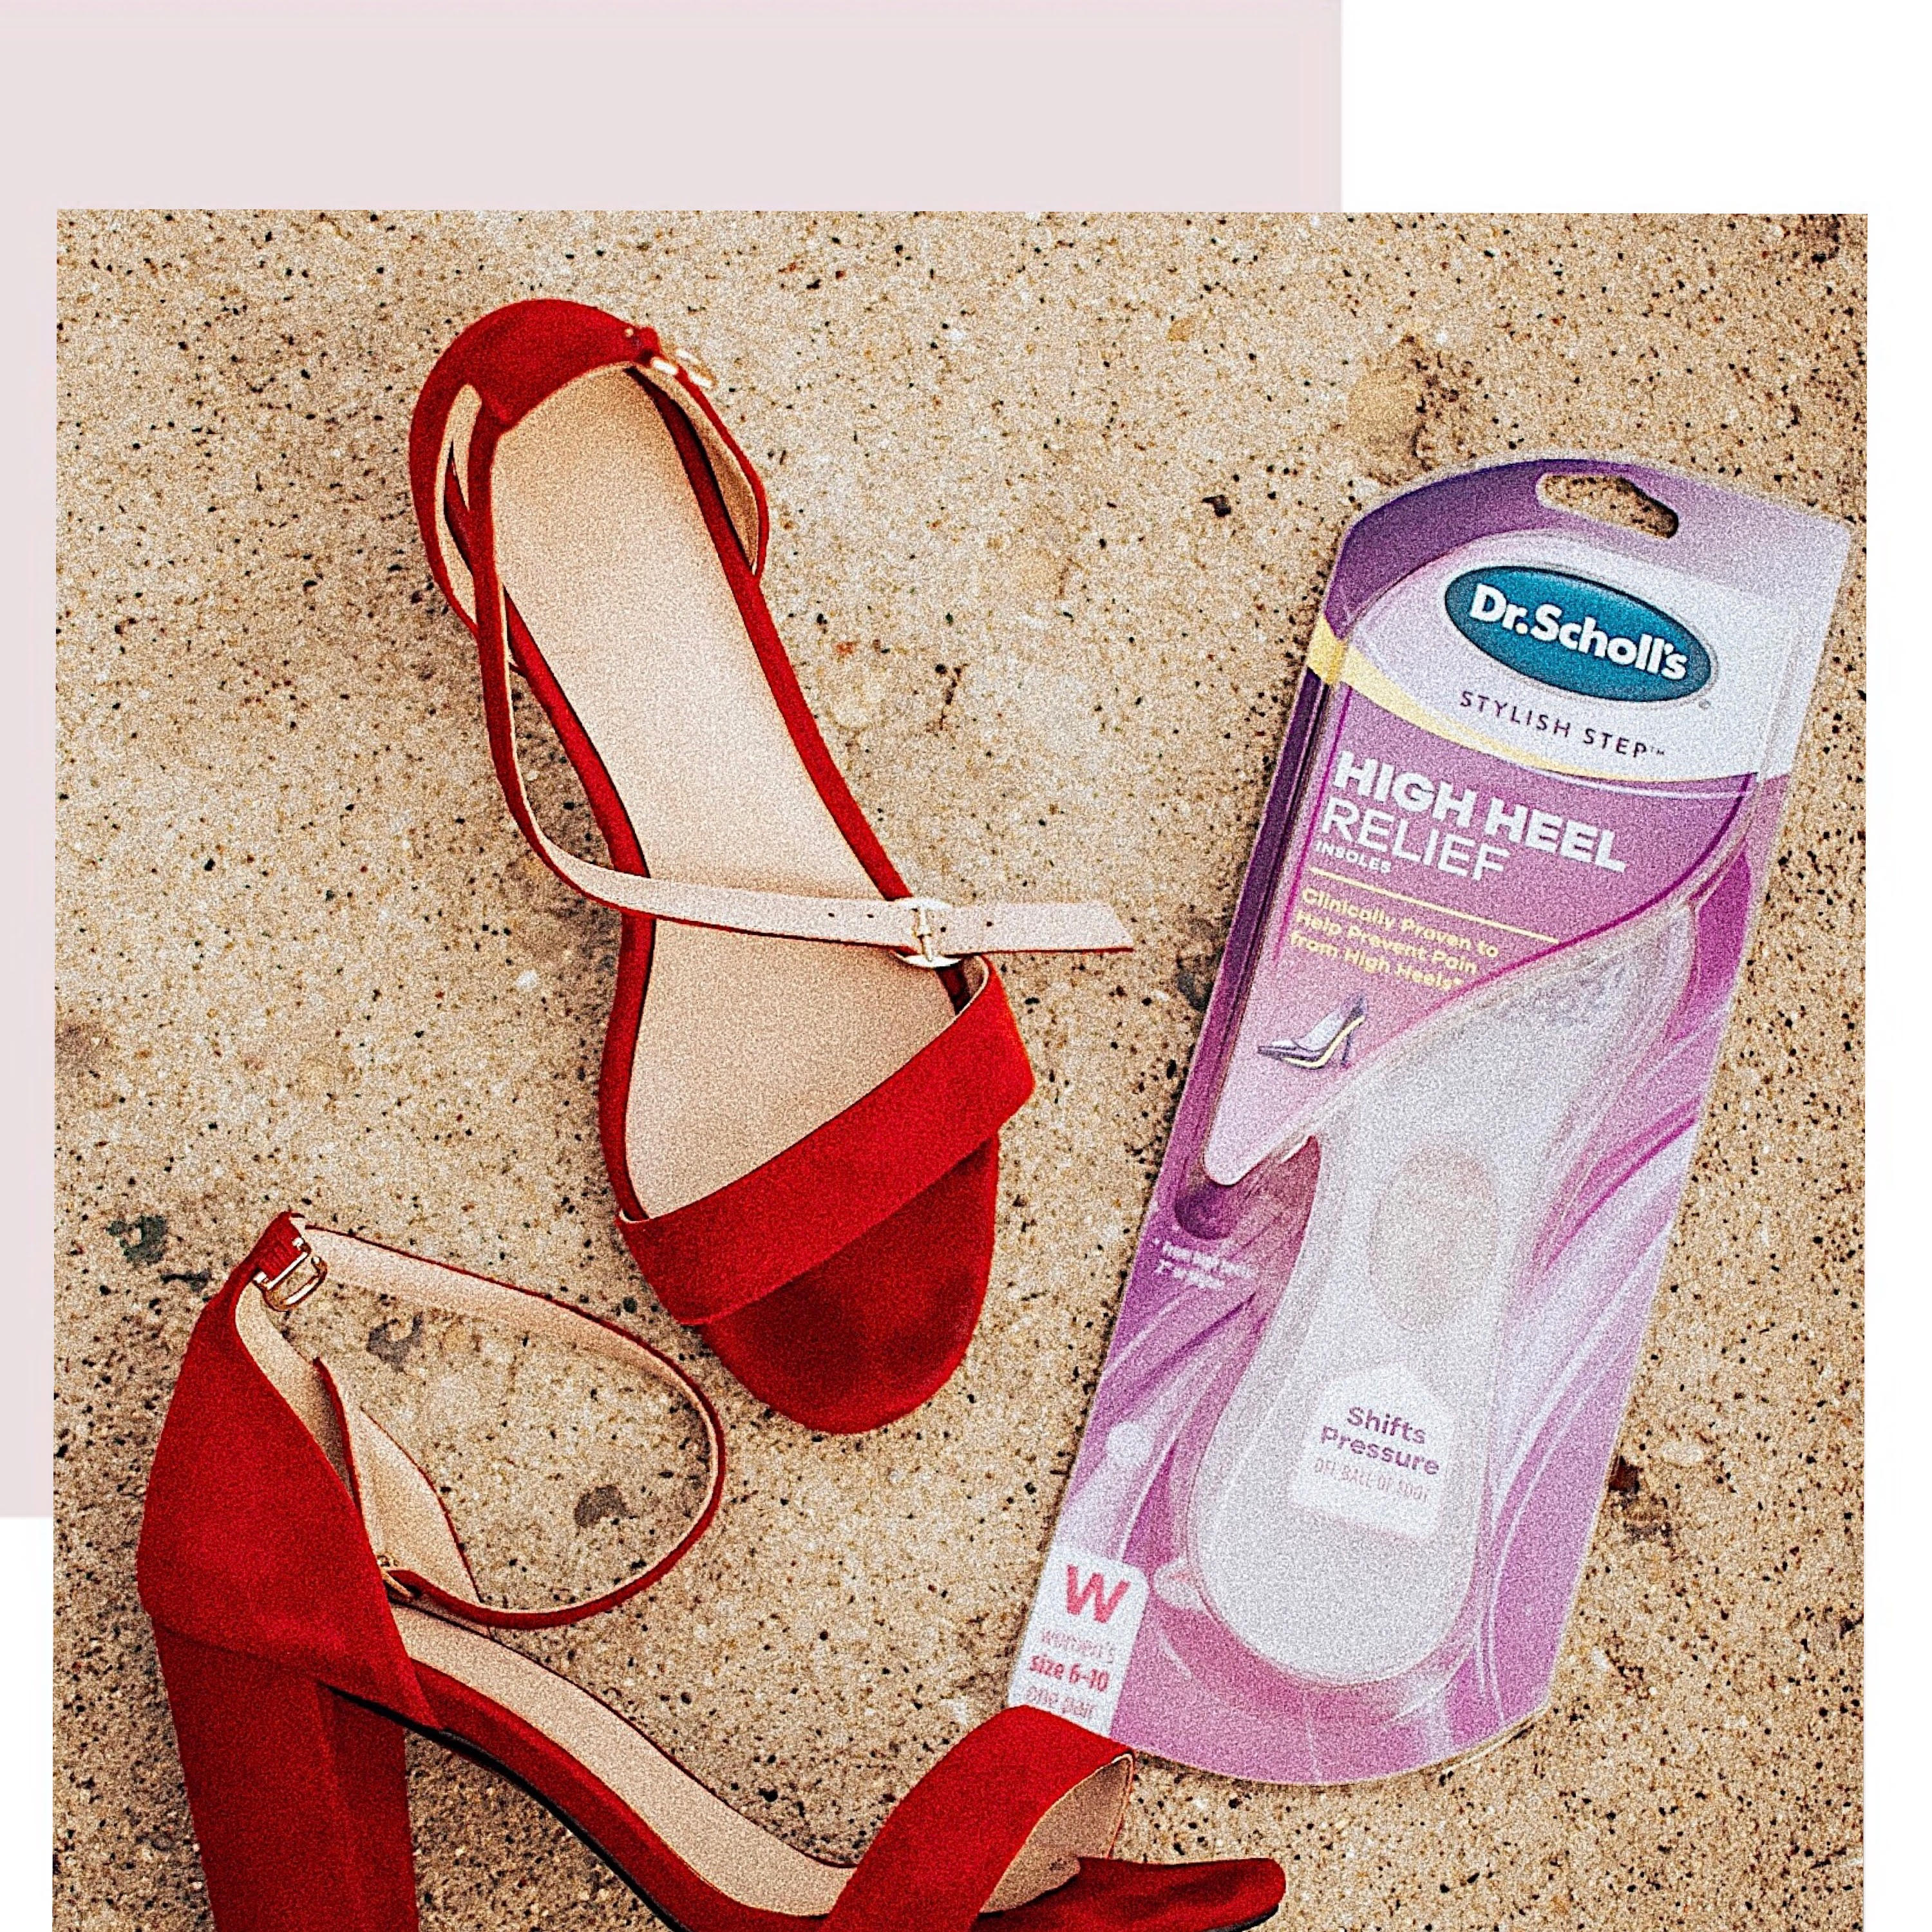 Vanessa-Lambert-blogger-behind-What-Would-V-Wear-wears-Dr-Scholl's-insoles-to-stay-comfy-and-stylish-during-NYFW